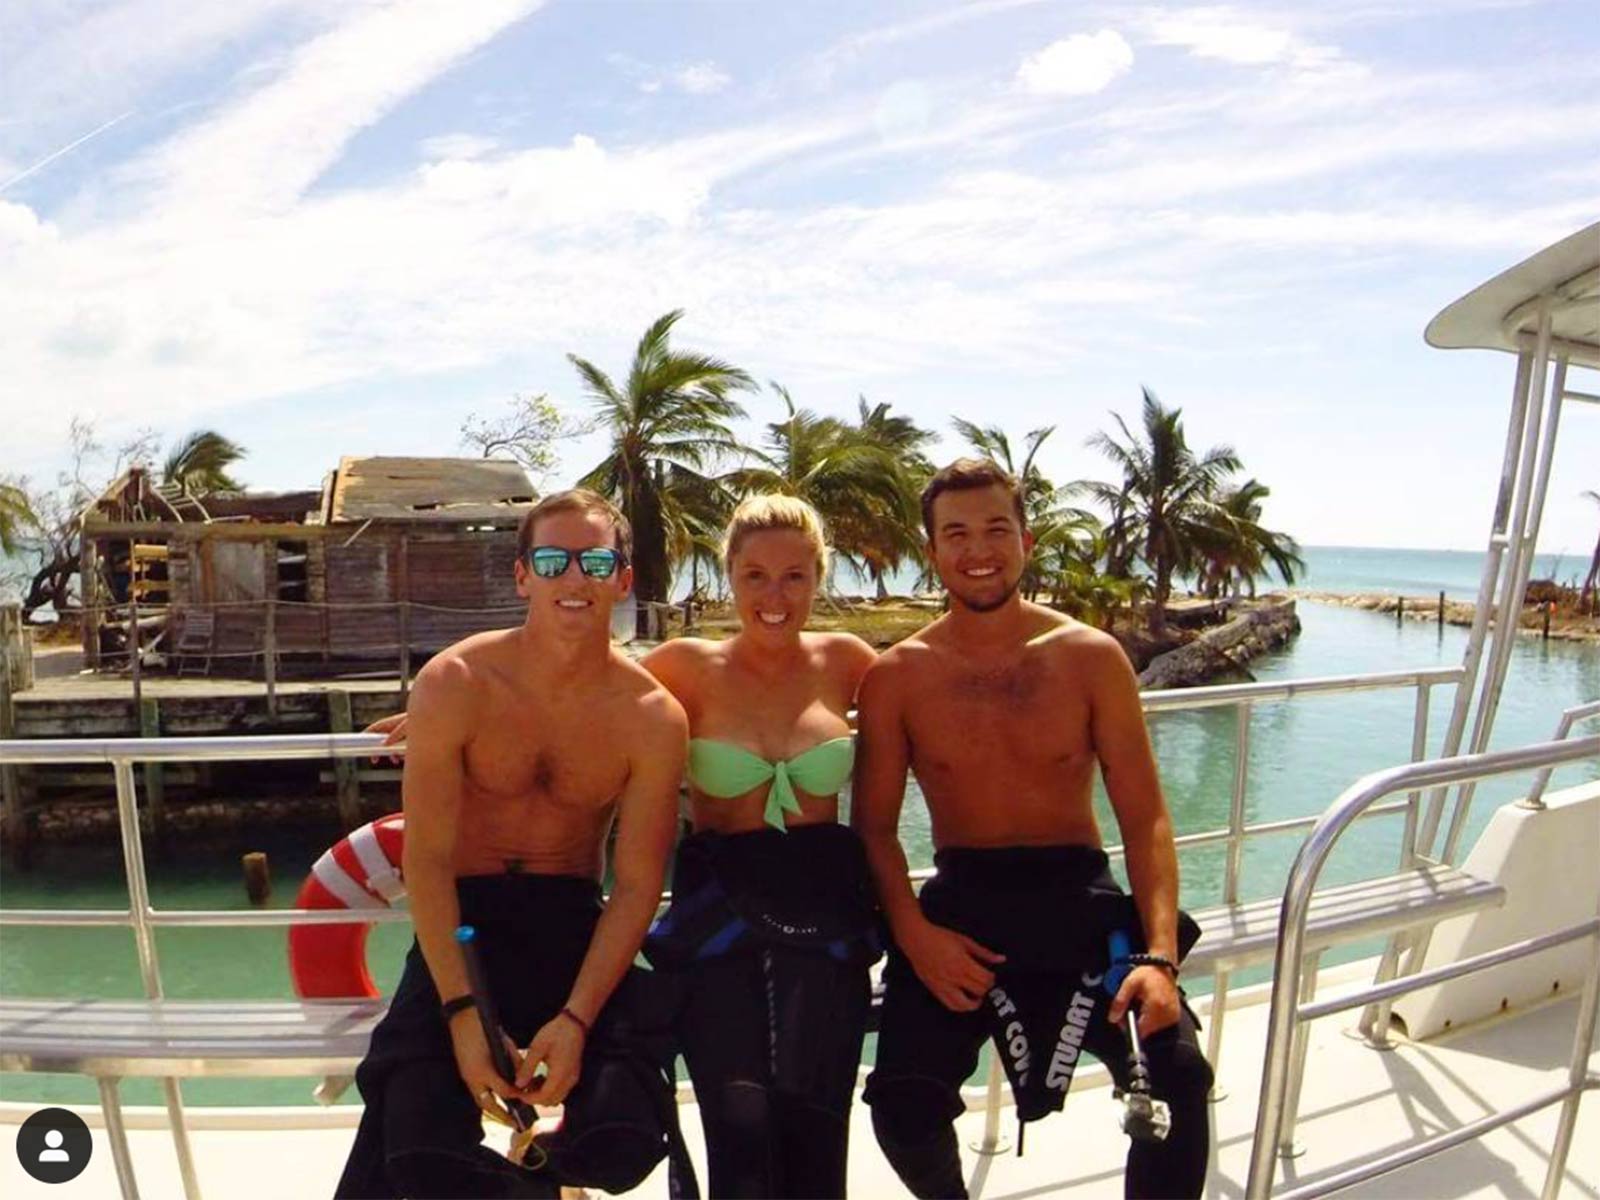 David Simpson and friends in the Bahamas. Diving with sharks in the Bahamas